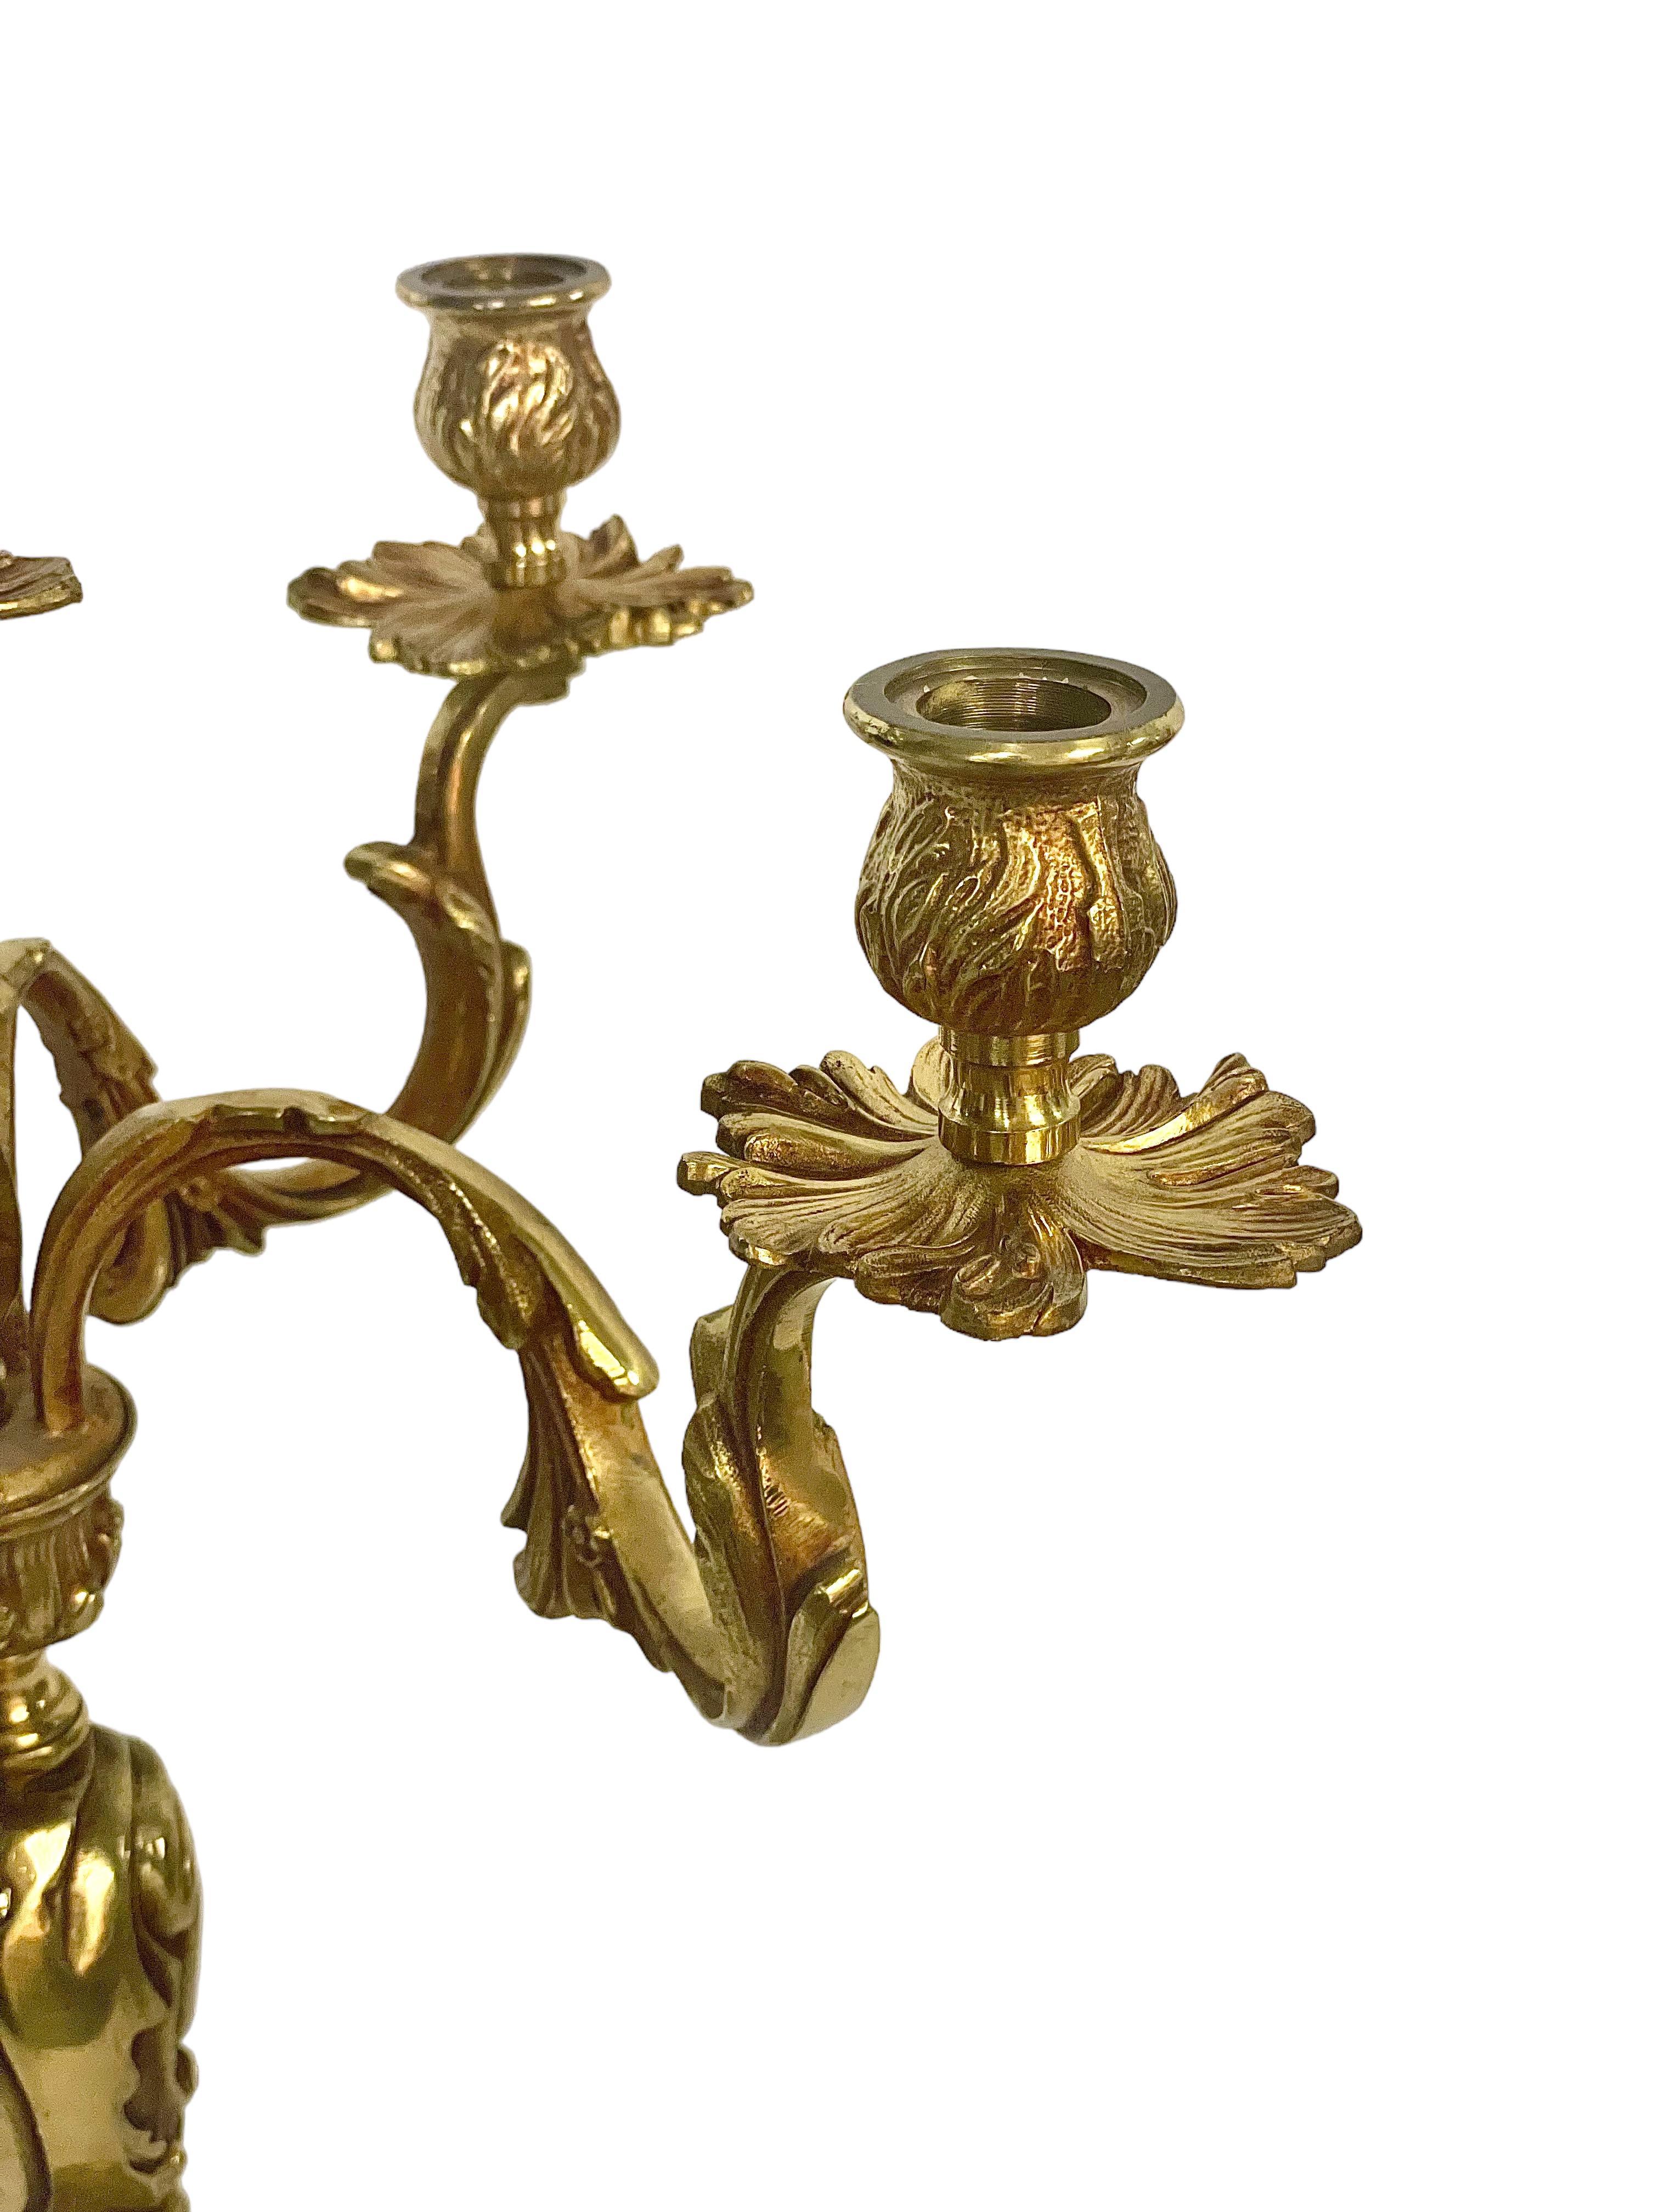 A large and ornate solid gilt bronze five-arm candelabra, with finely chiseled detailing in the Rococo style. Each of the five arms takes the form of scrolled acanthus leaves, and terminates in a goblet-shaped candle holder sitting above a shaped